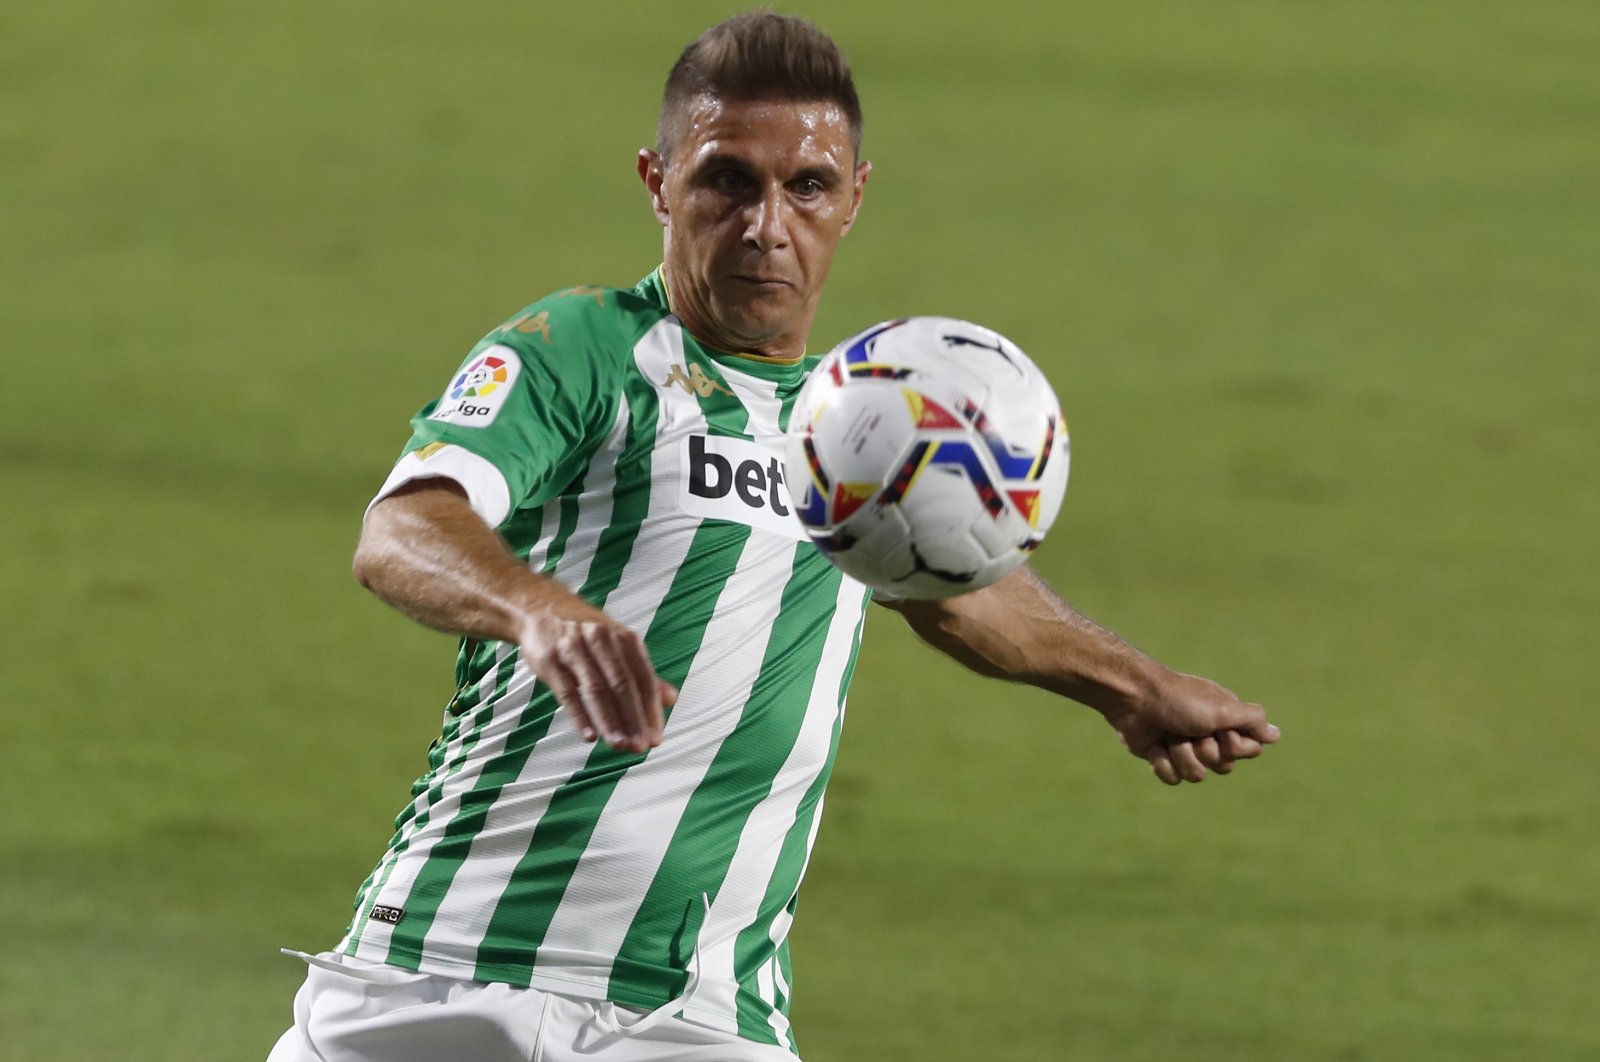 Betis&#039; Joaquin in action during a La Liga match against Real Madrid, Seville, Spain, Sept. 26, 2020. (AP Photo)